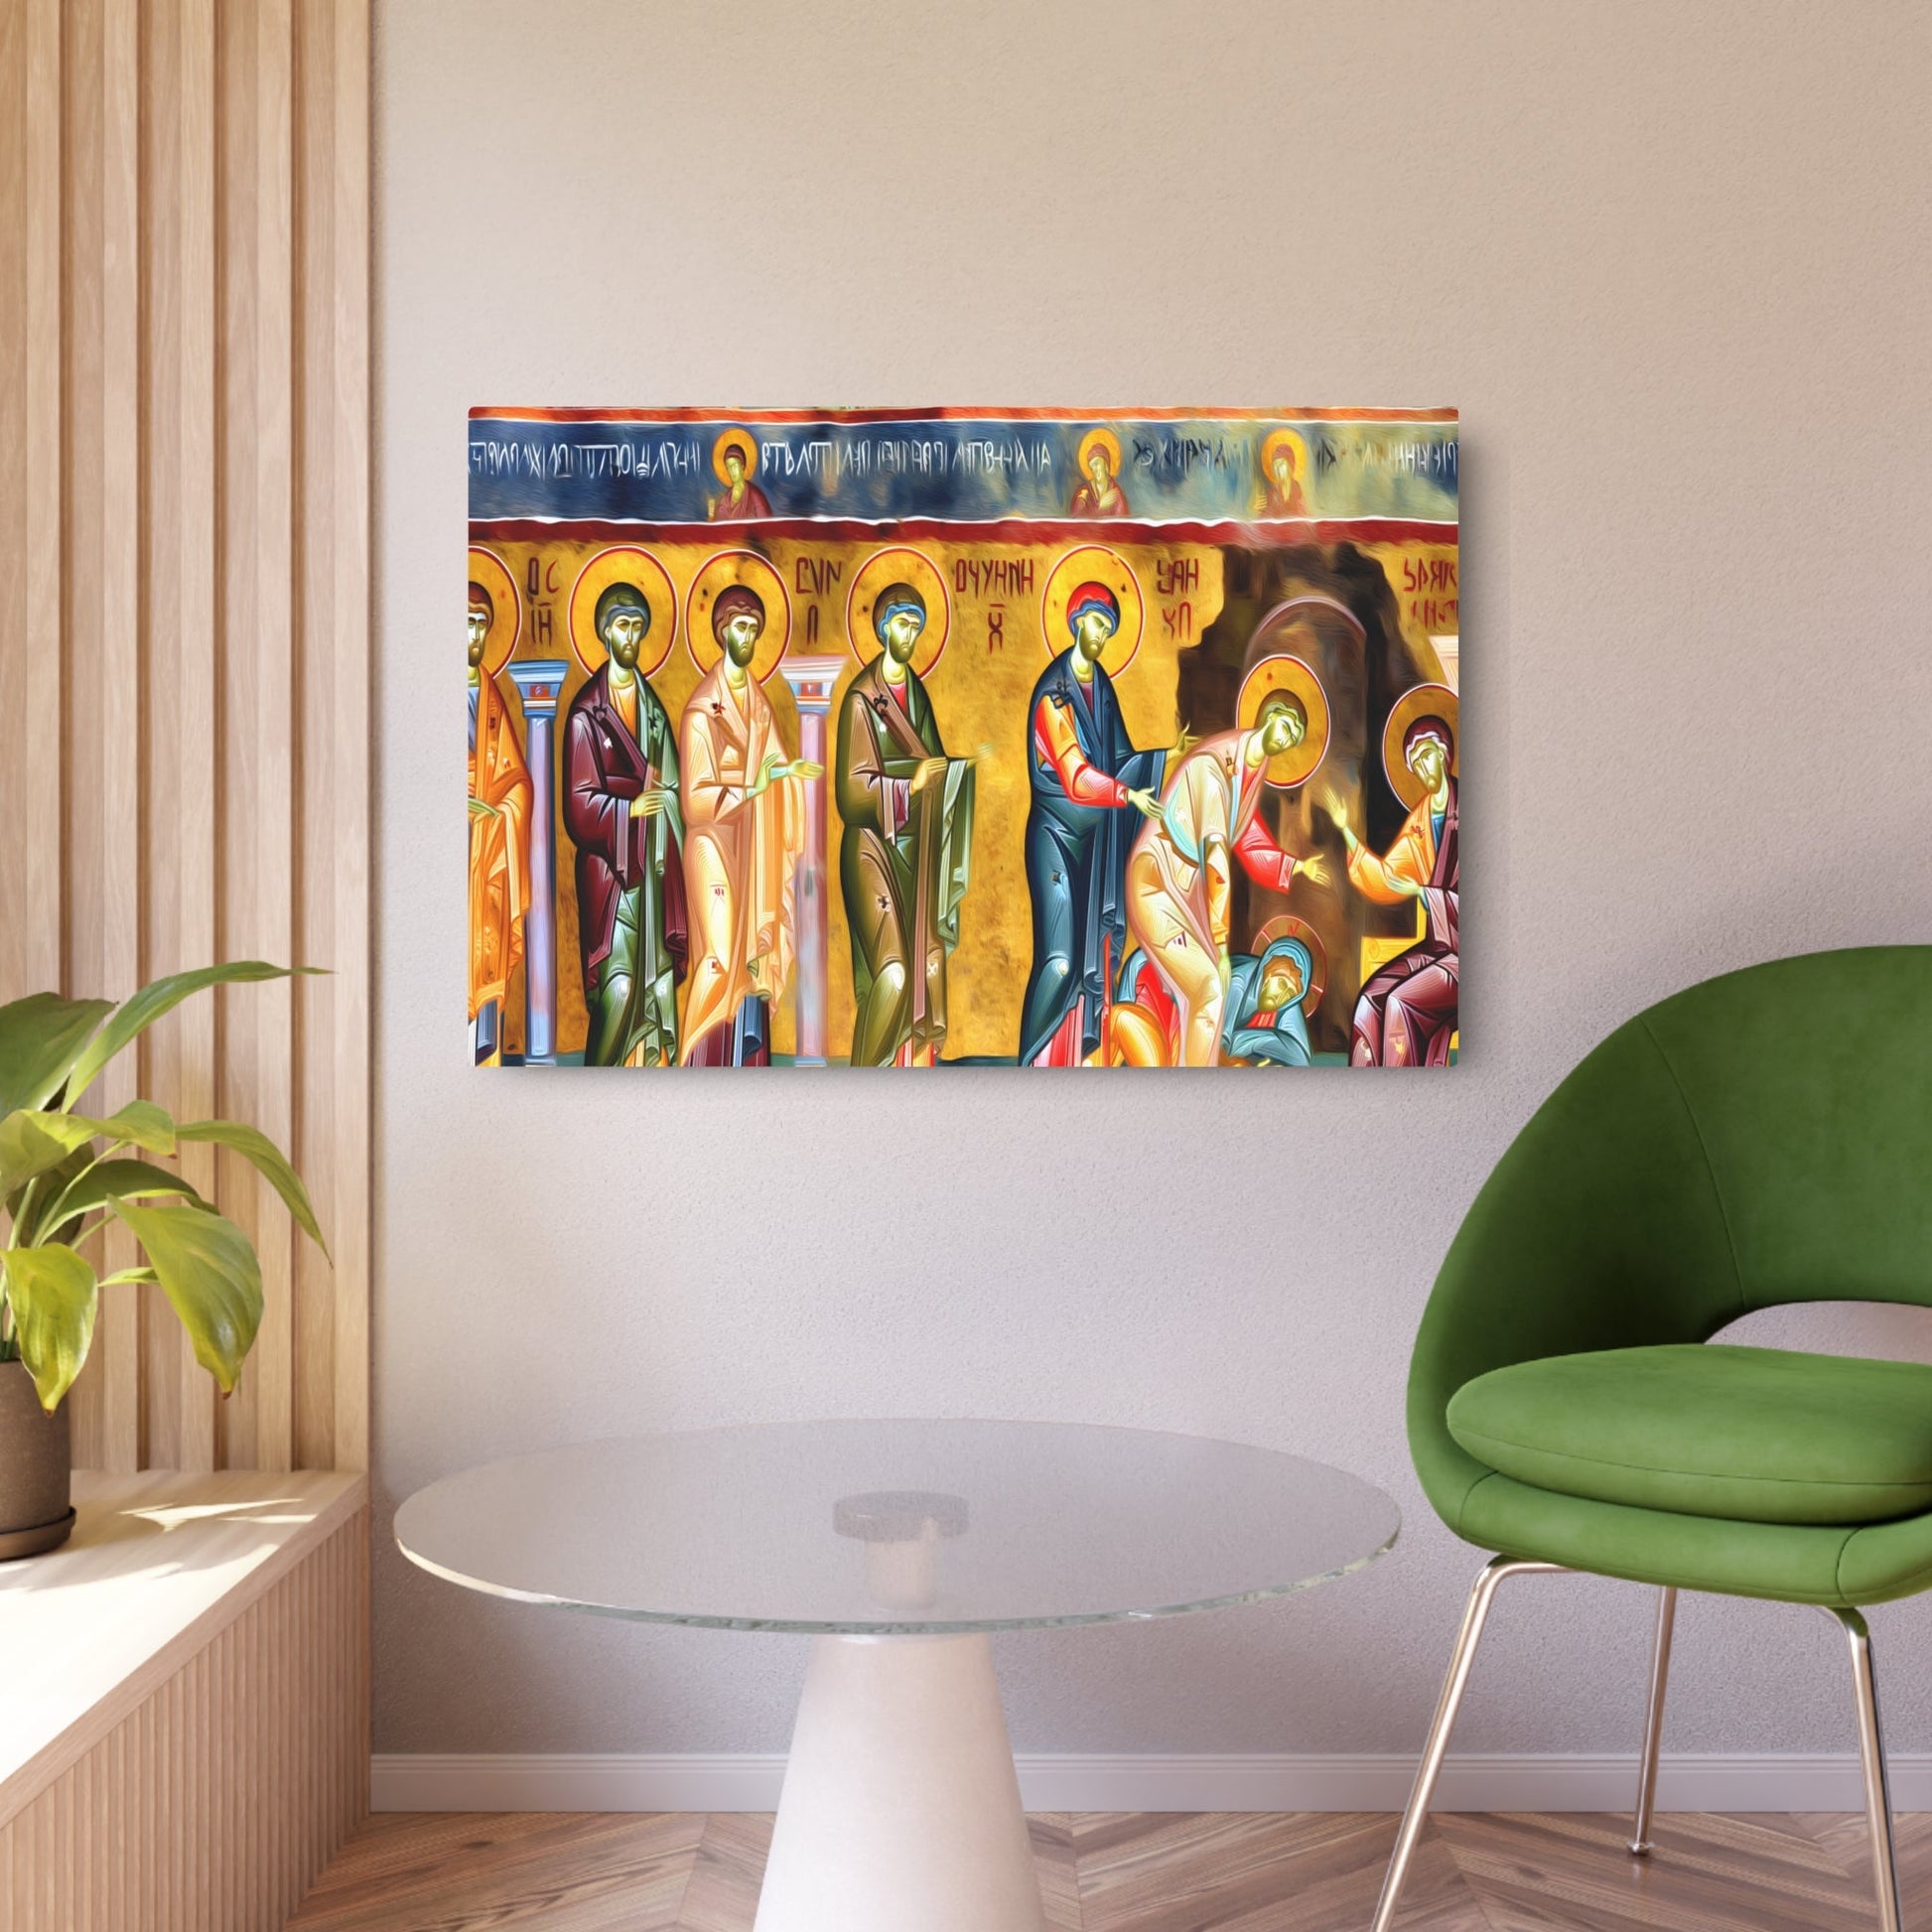 Metal Poster Art | "Prominent Byzantine Art Style Detailed Image: Non-Western & Global Styles Featuring Flat Frontal Figures, Use of Gold, Elaborate Background - Metal Poster Art 36″ x 24″ (Horizontal) 0.12''